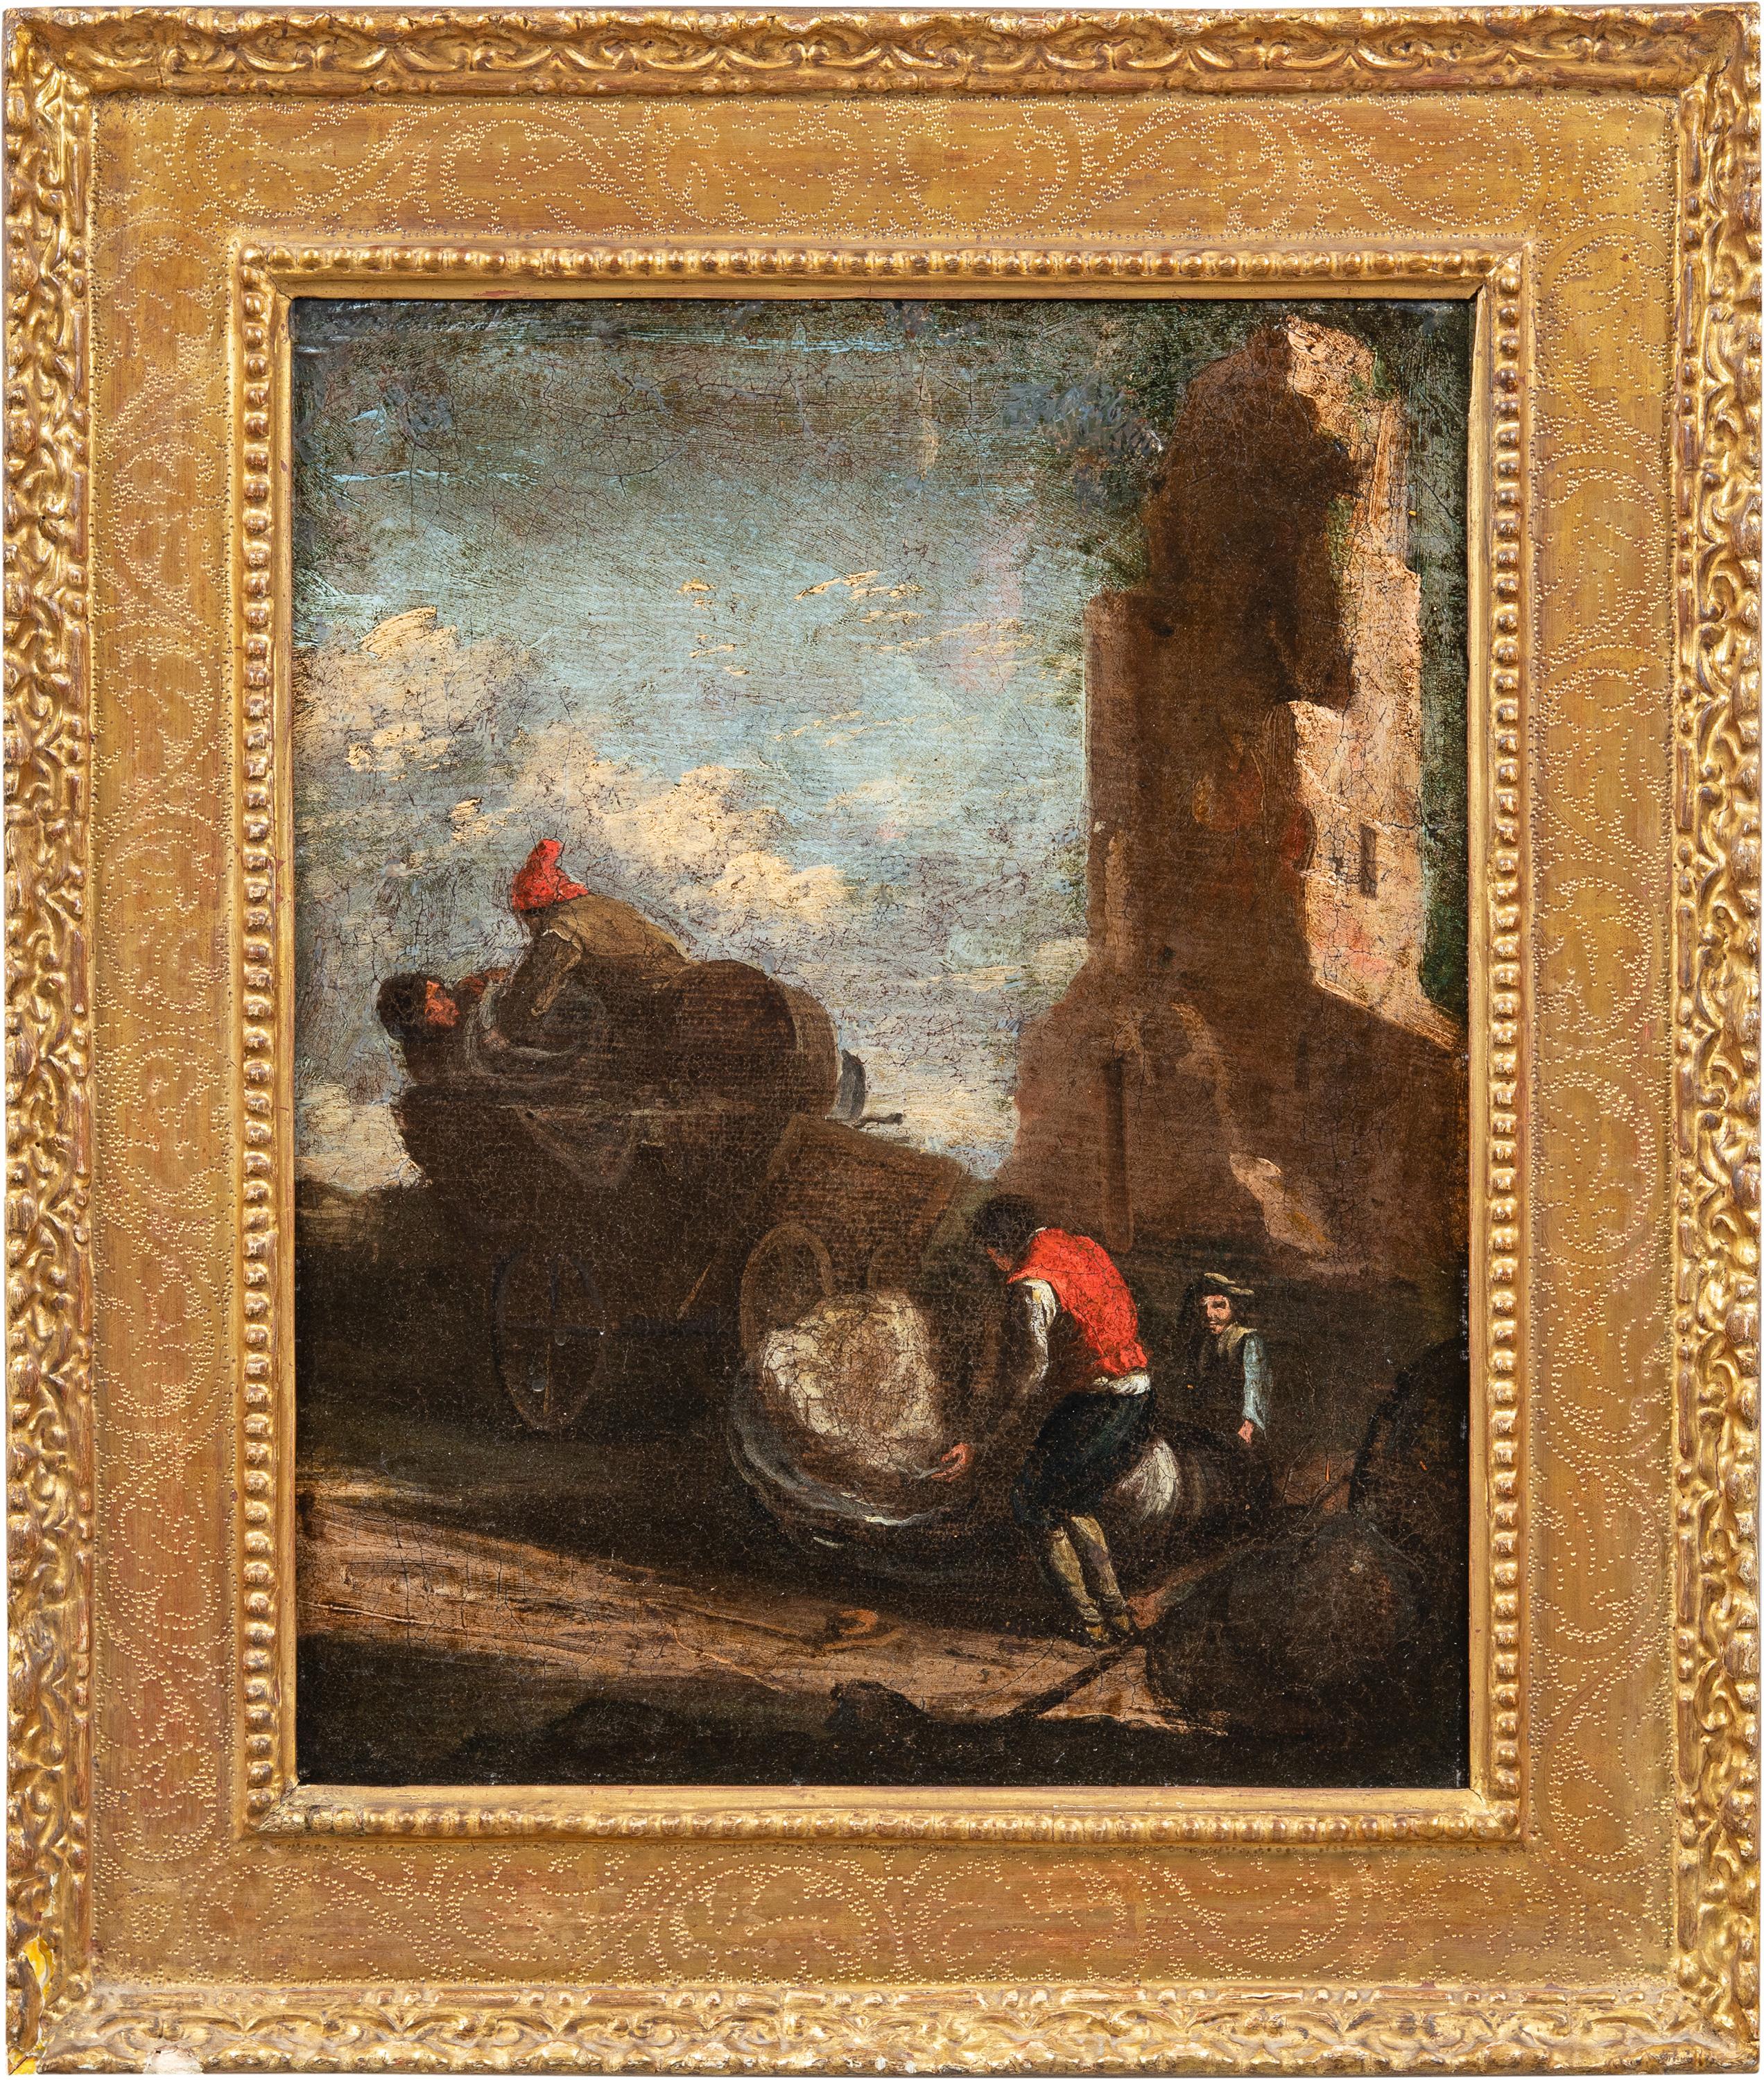 Unknown Figurative Painting - Antique Roman painter - 18th century landscape painting - Wanderers - Italy